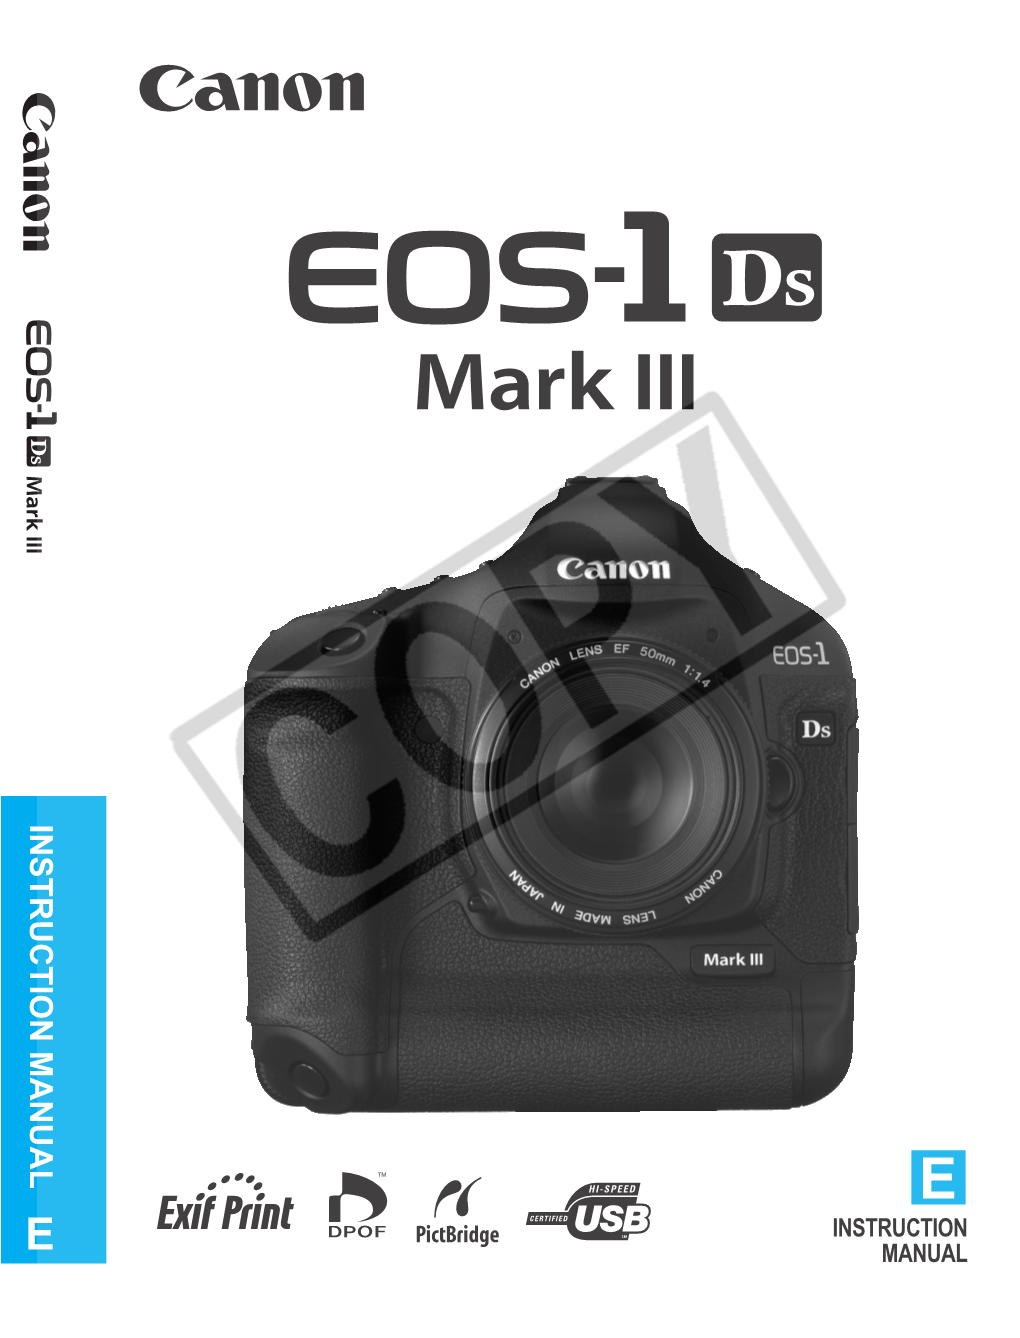 EOS-1Ds Mark III Is a Top-Of-The-Line, High-Performance Digital SLR Camera with a Large, Fine-Detail, 21.10-Megapixel CMOS Sensor (Approx